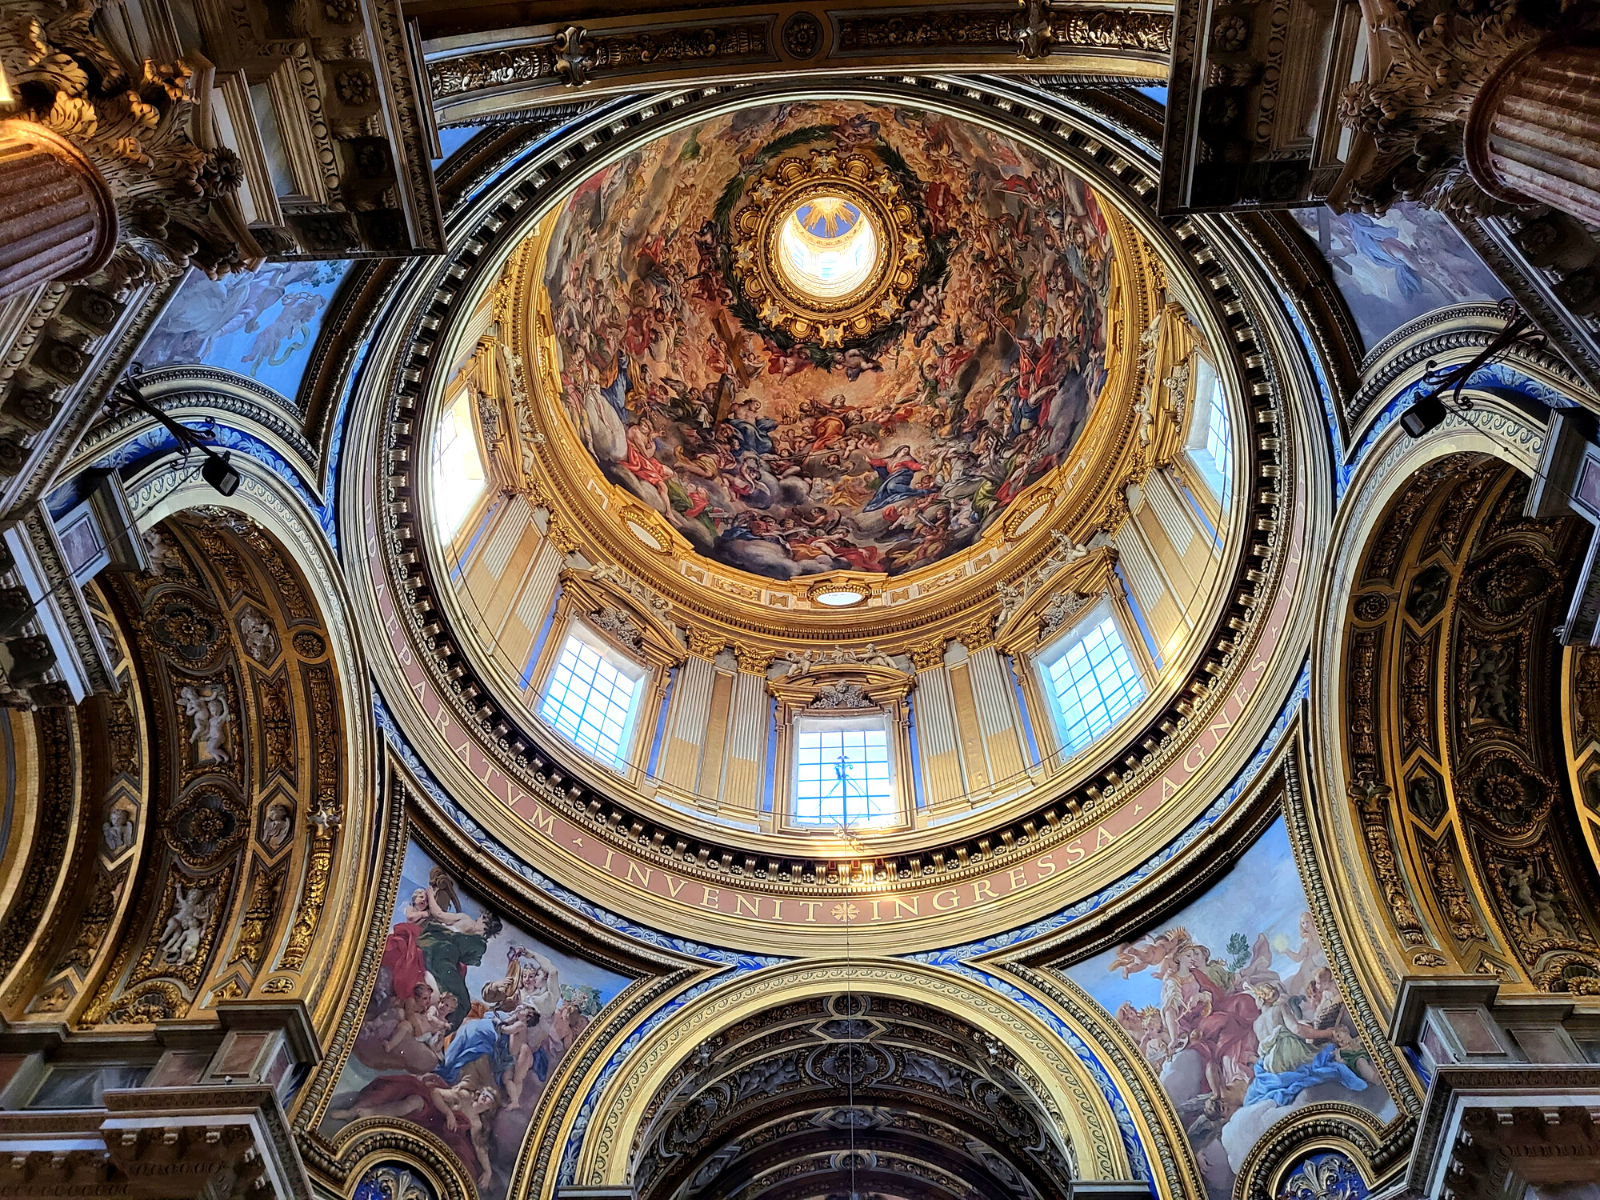 The Church of Sant'Agnese in Agone is decorated with several beautiful artworks dating to the Baroque period.